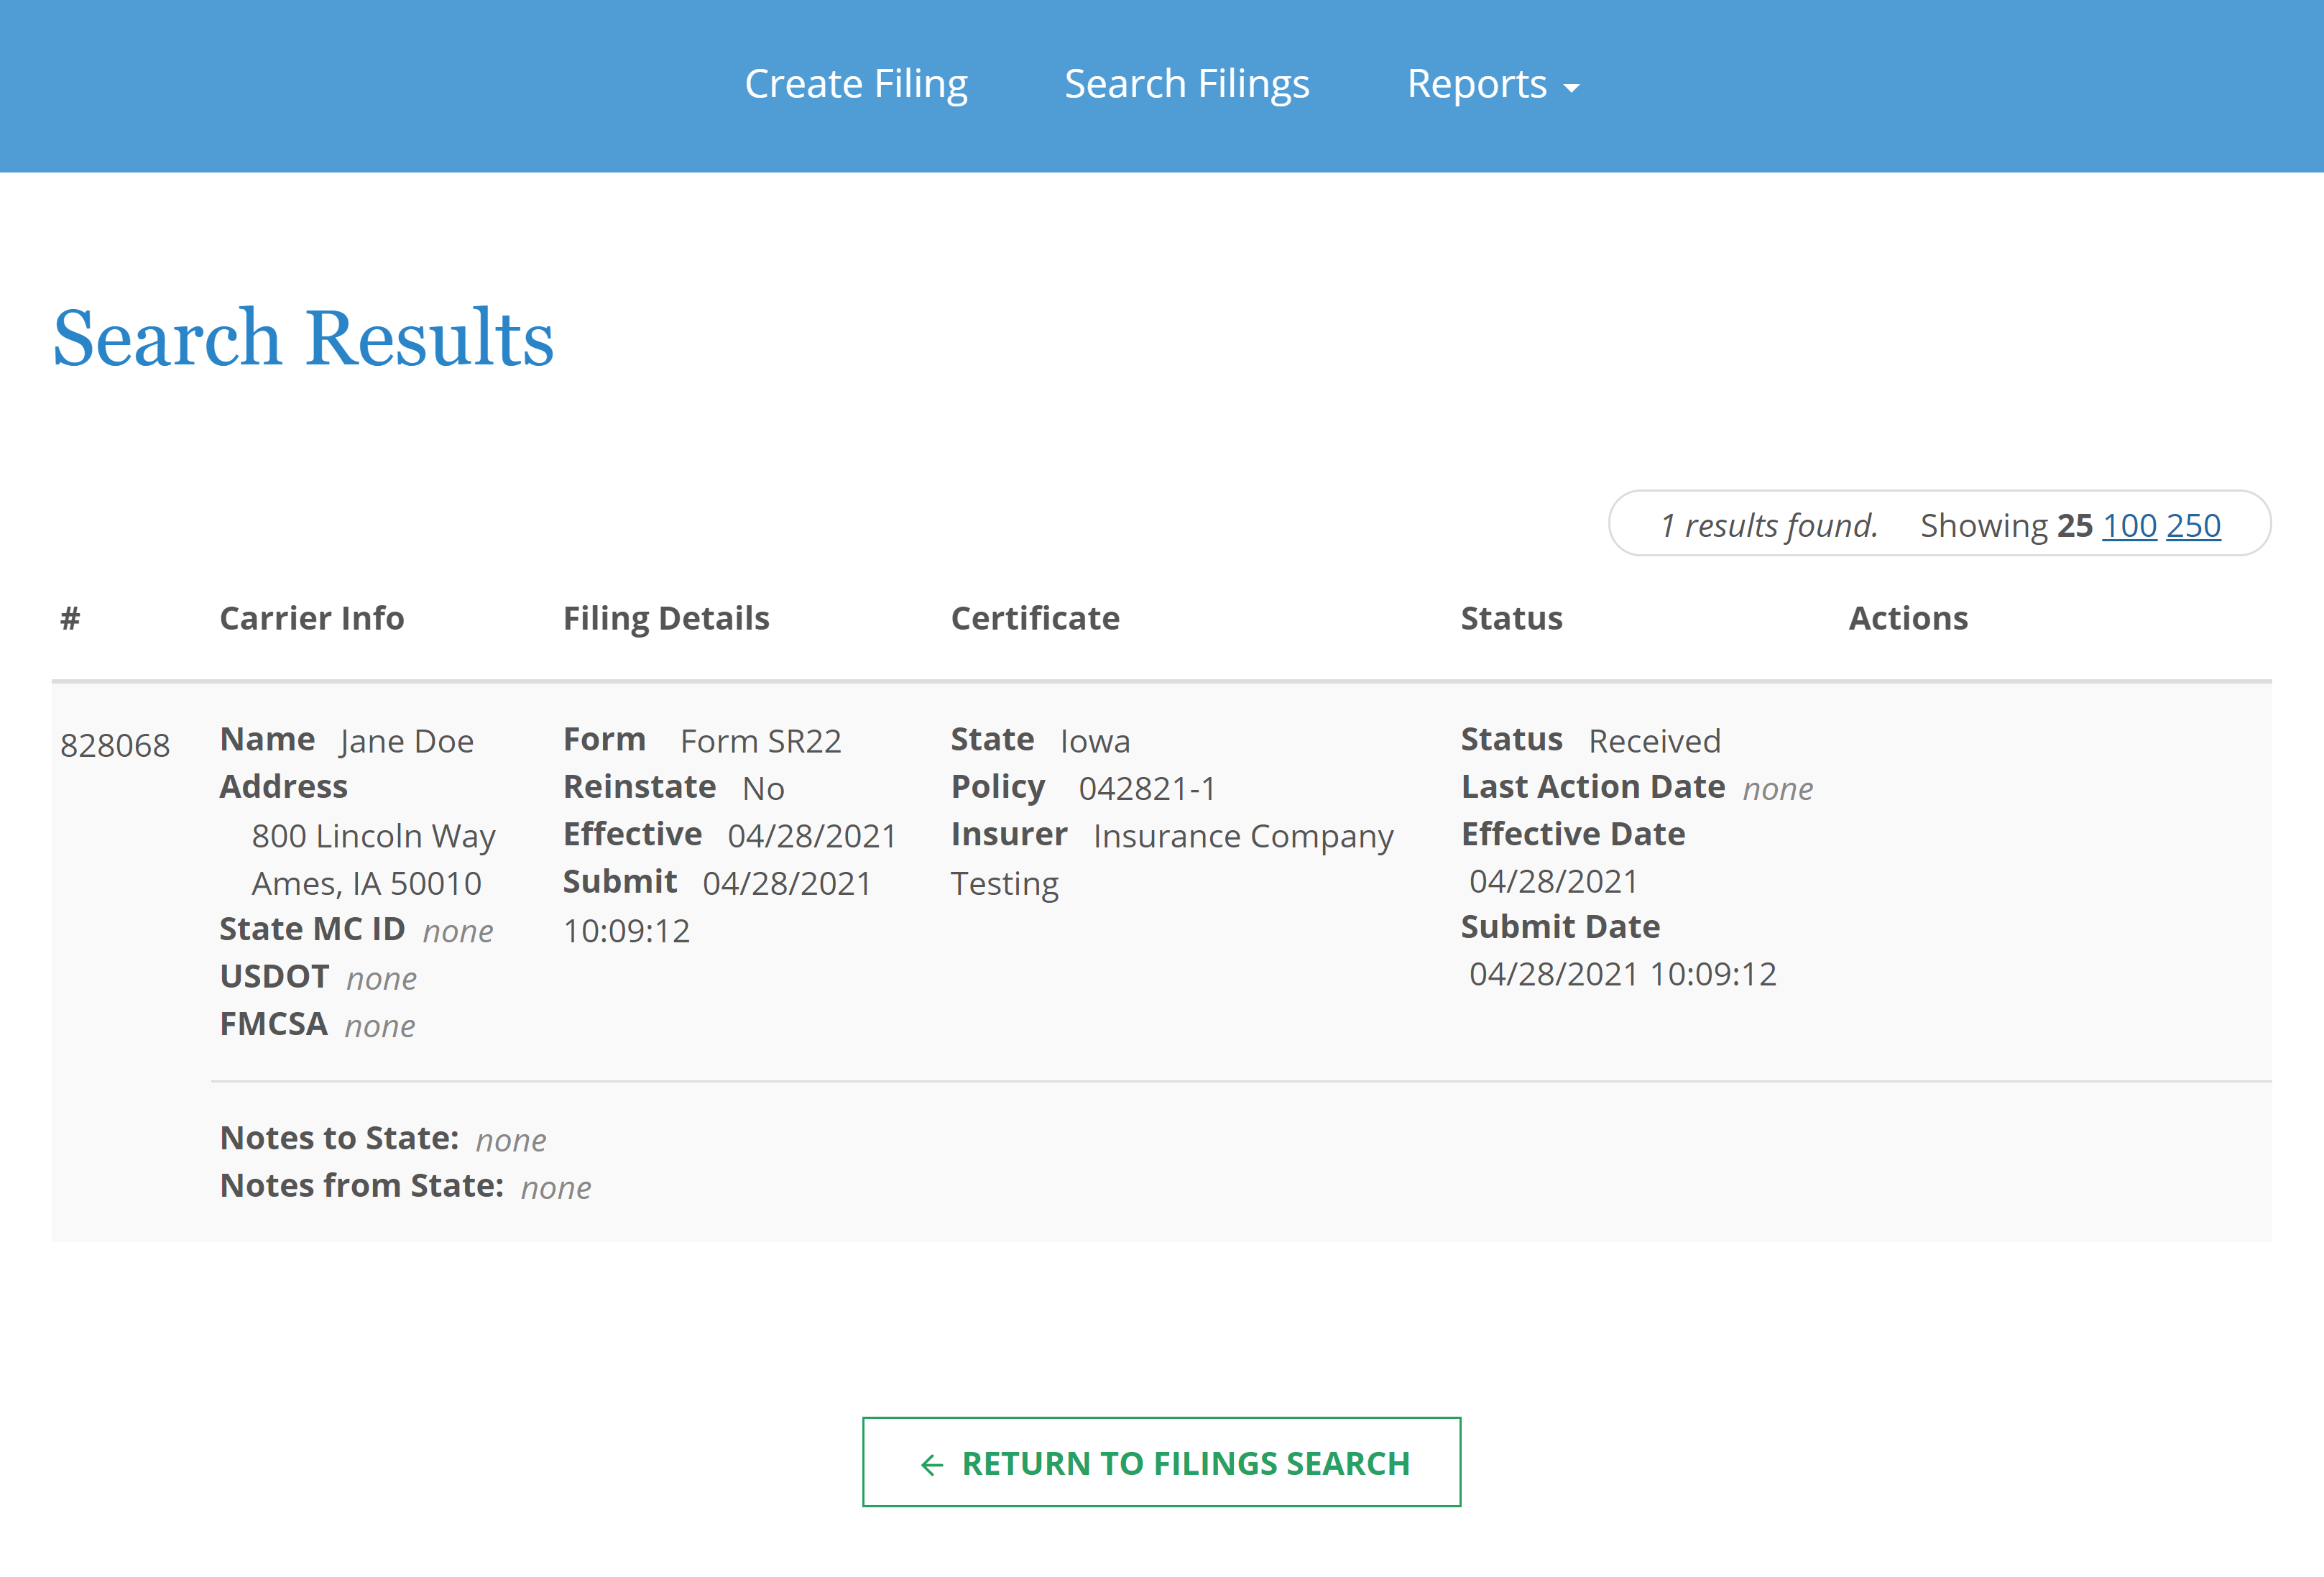 Screenshot of interface for Filings Search and Search Results.